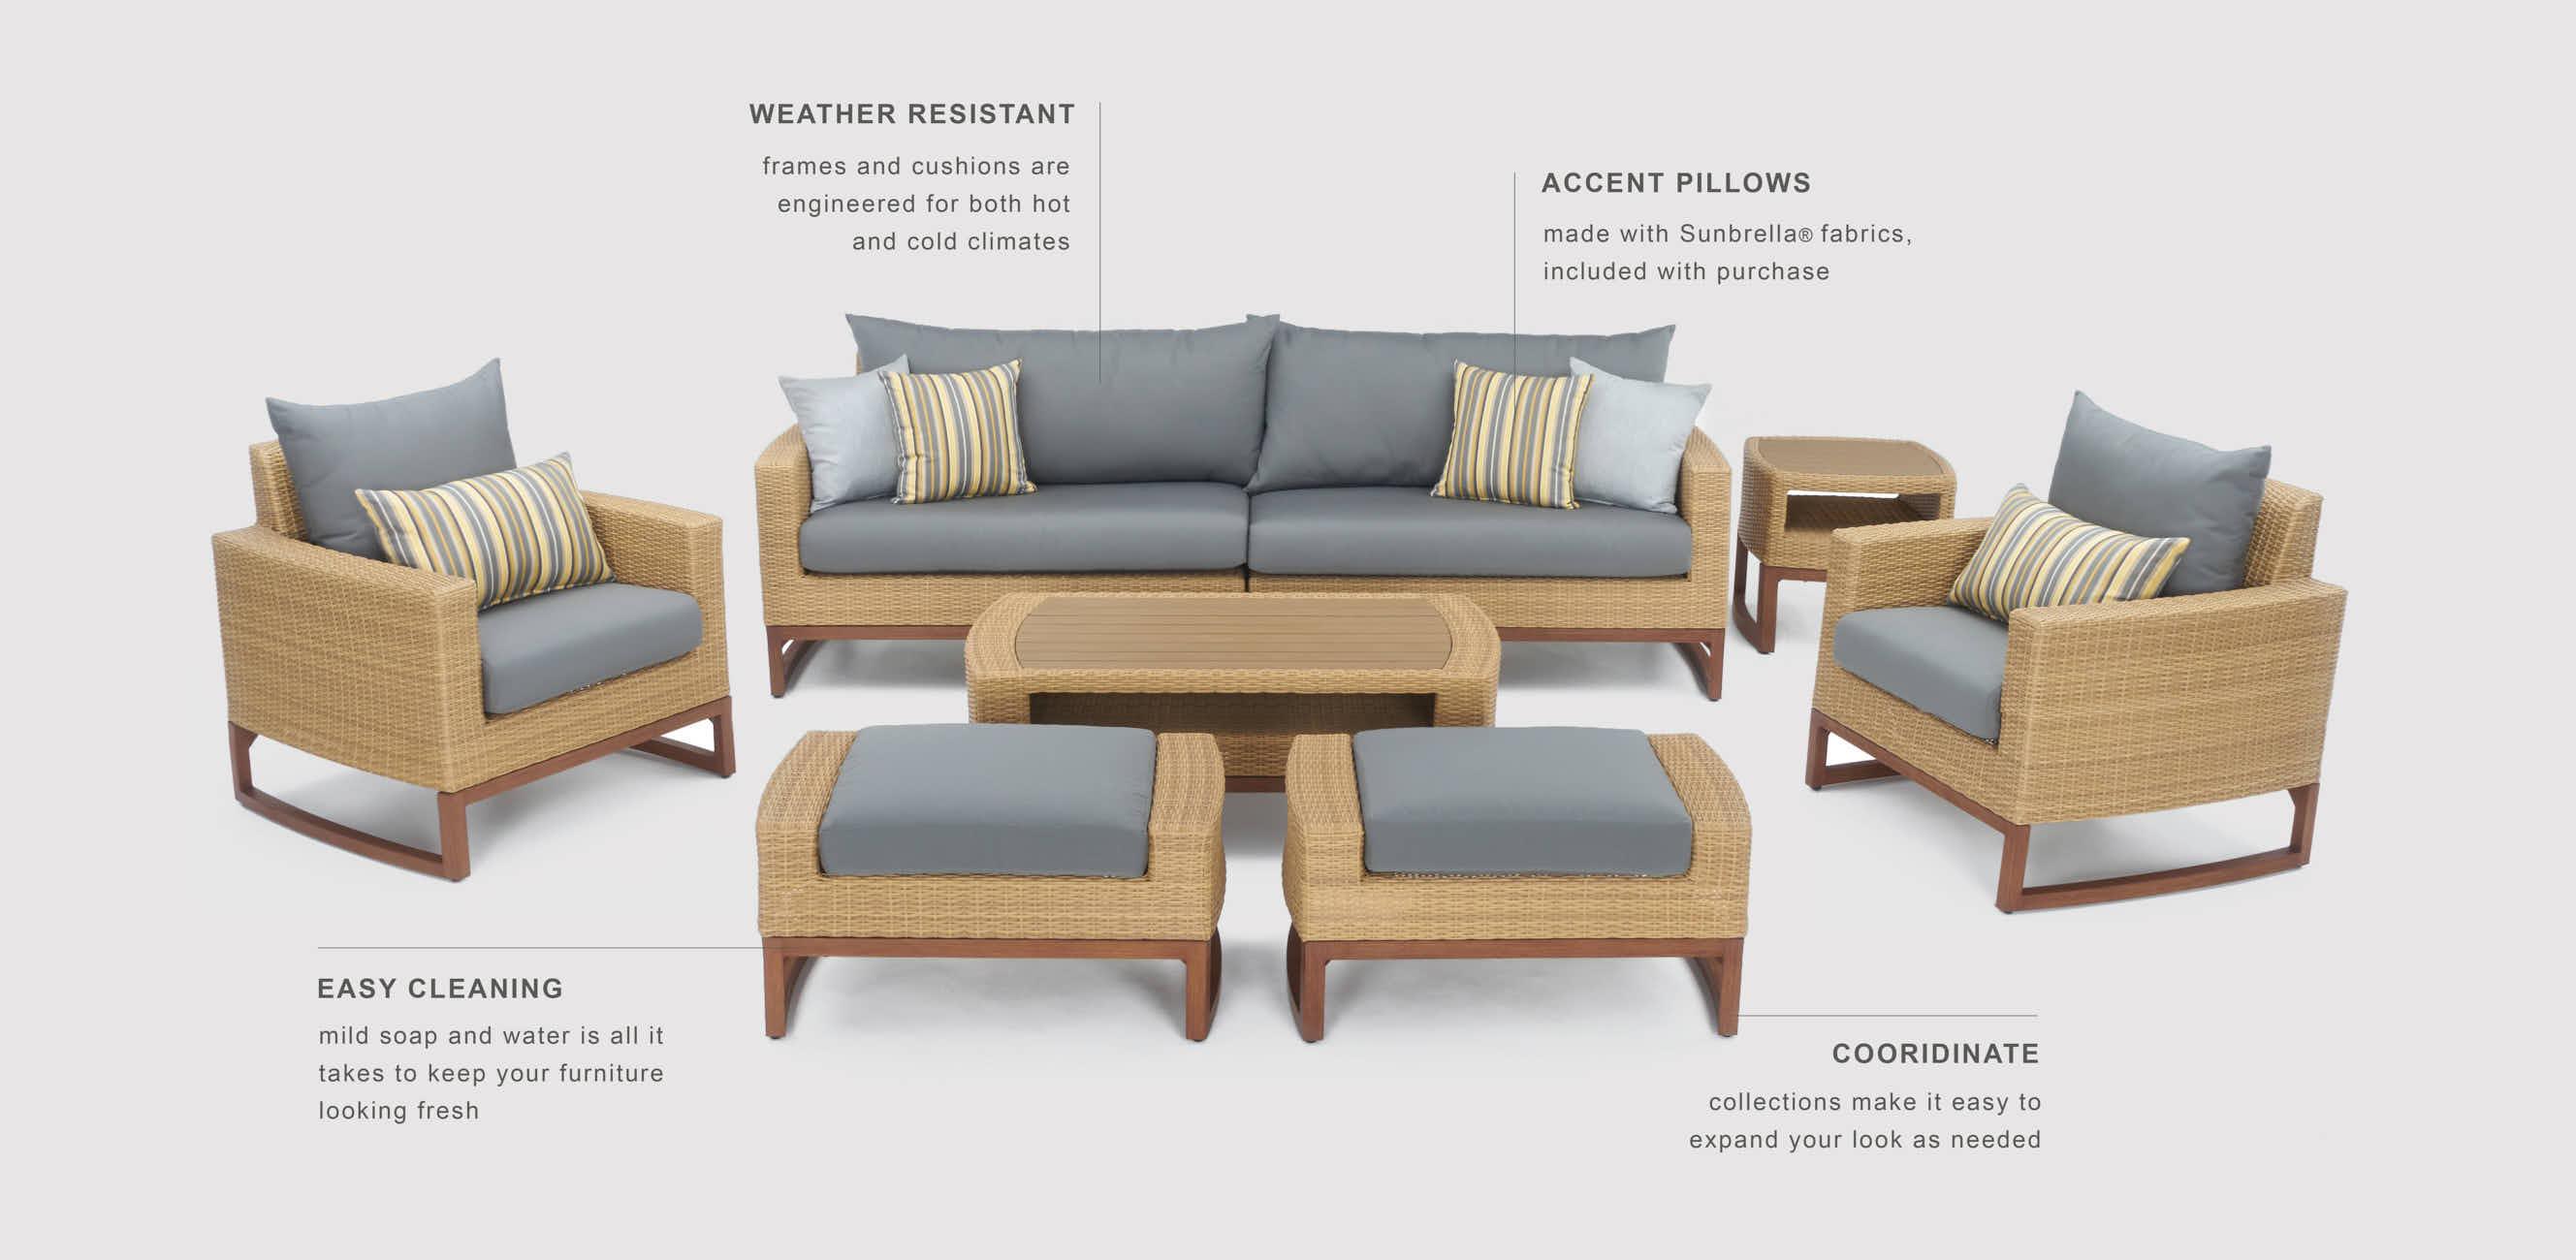 set of outdoor furniture with product advantages in text